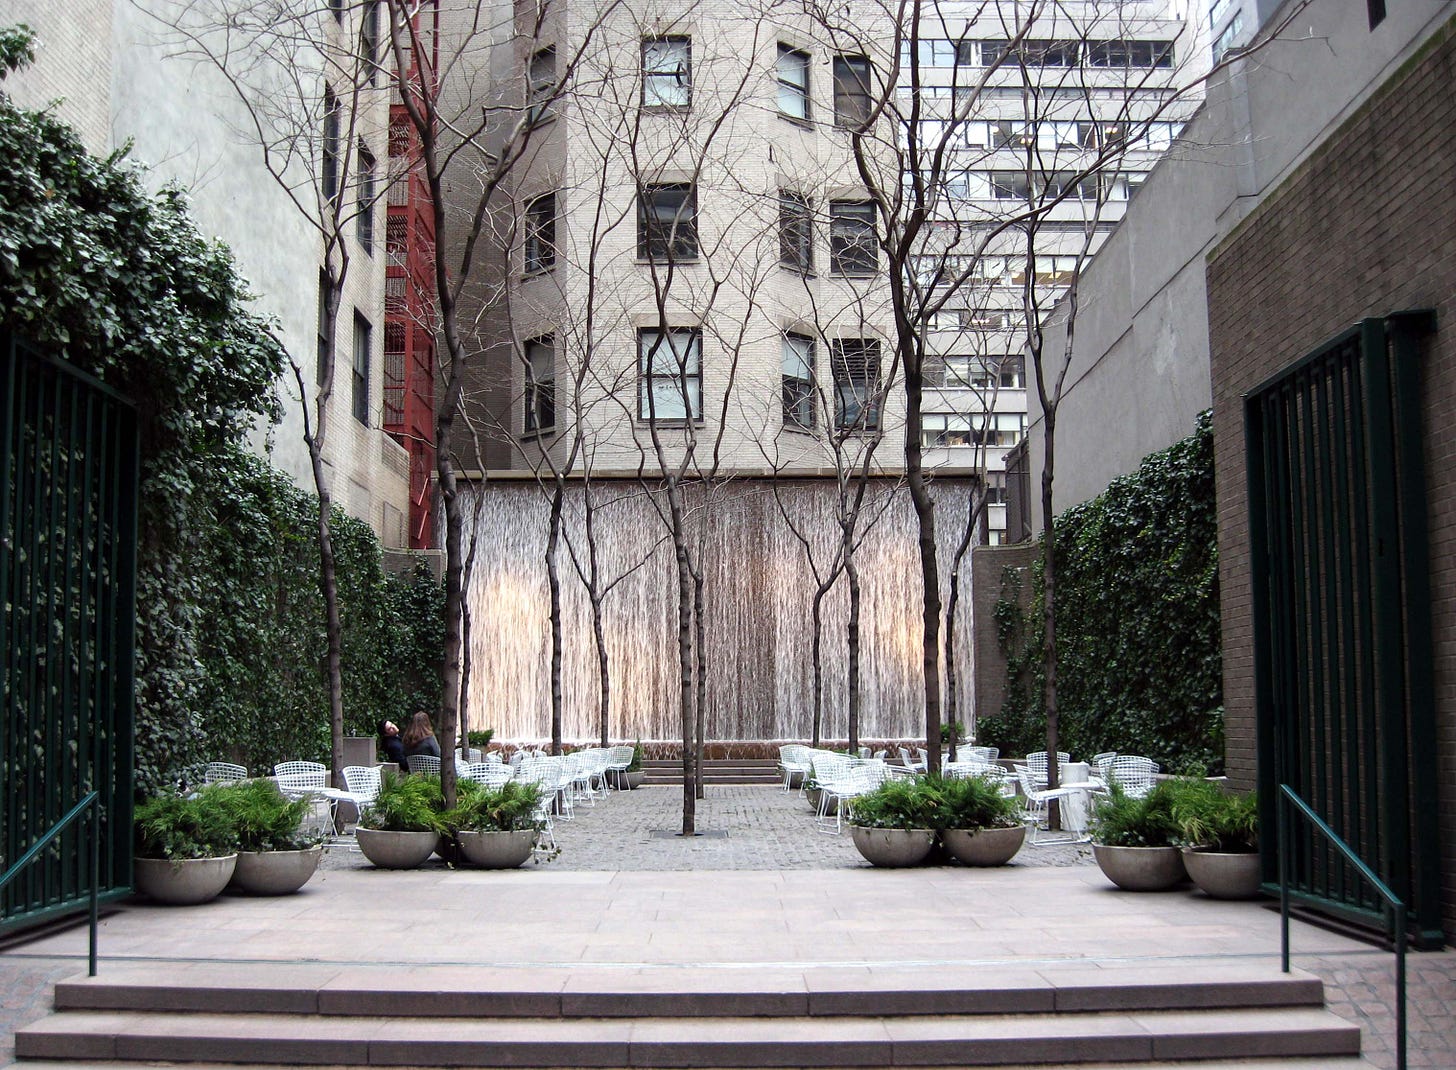 Paley Park in New York